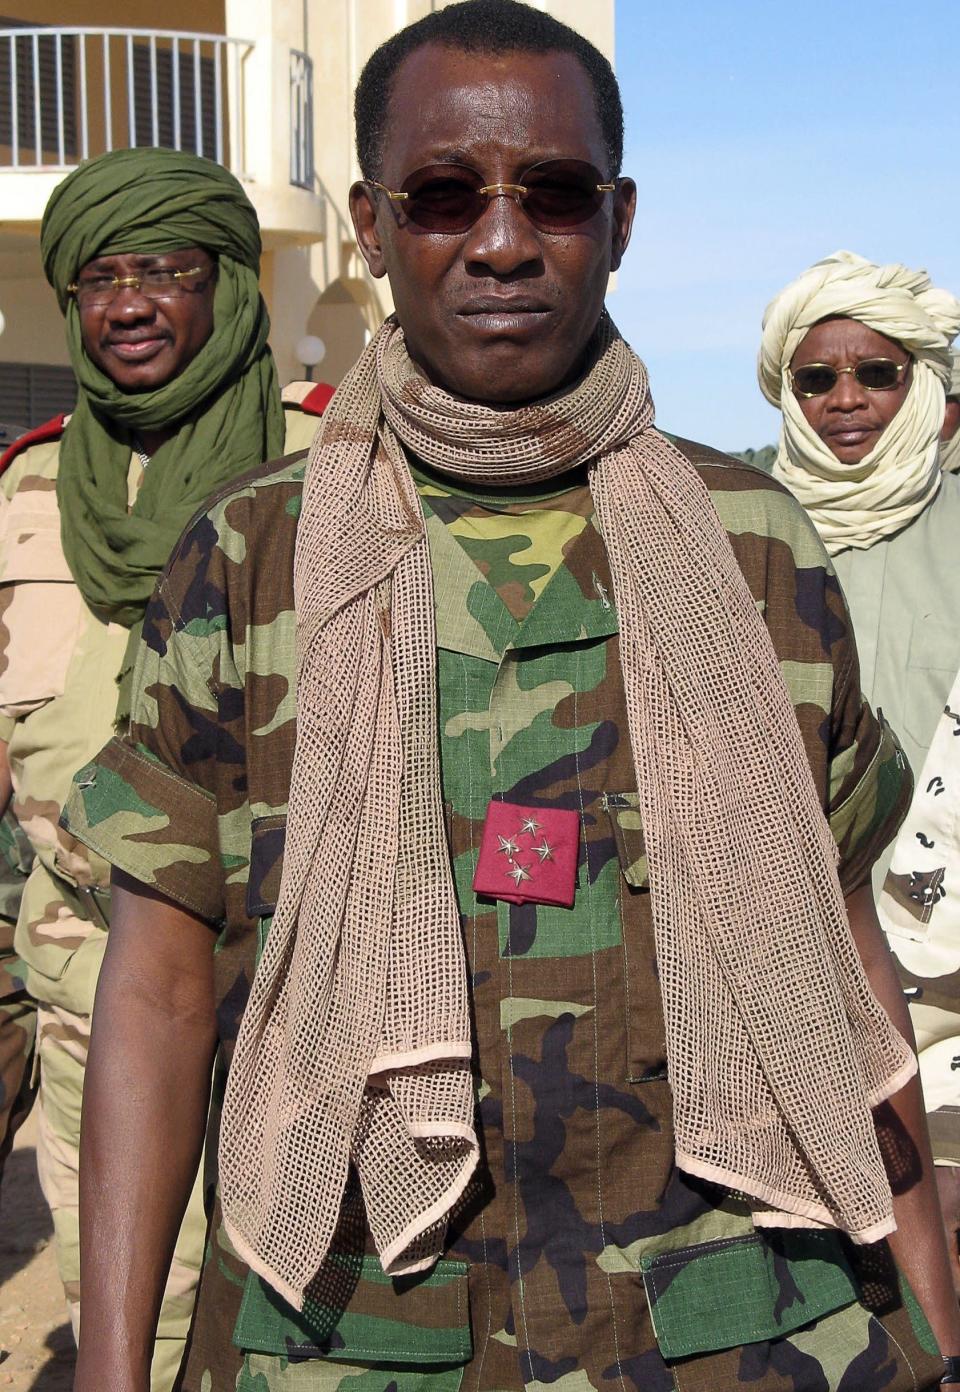 Déby in 2006 while supervising the activities of his army's campaign against rebels  - SONIA ROLLEY/AFP via Getty Images